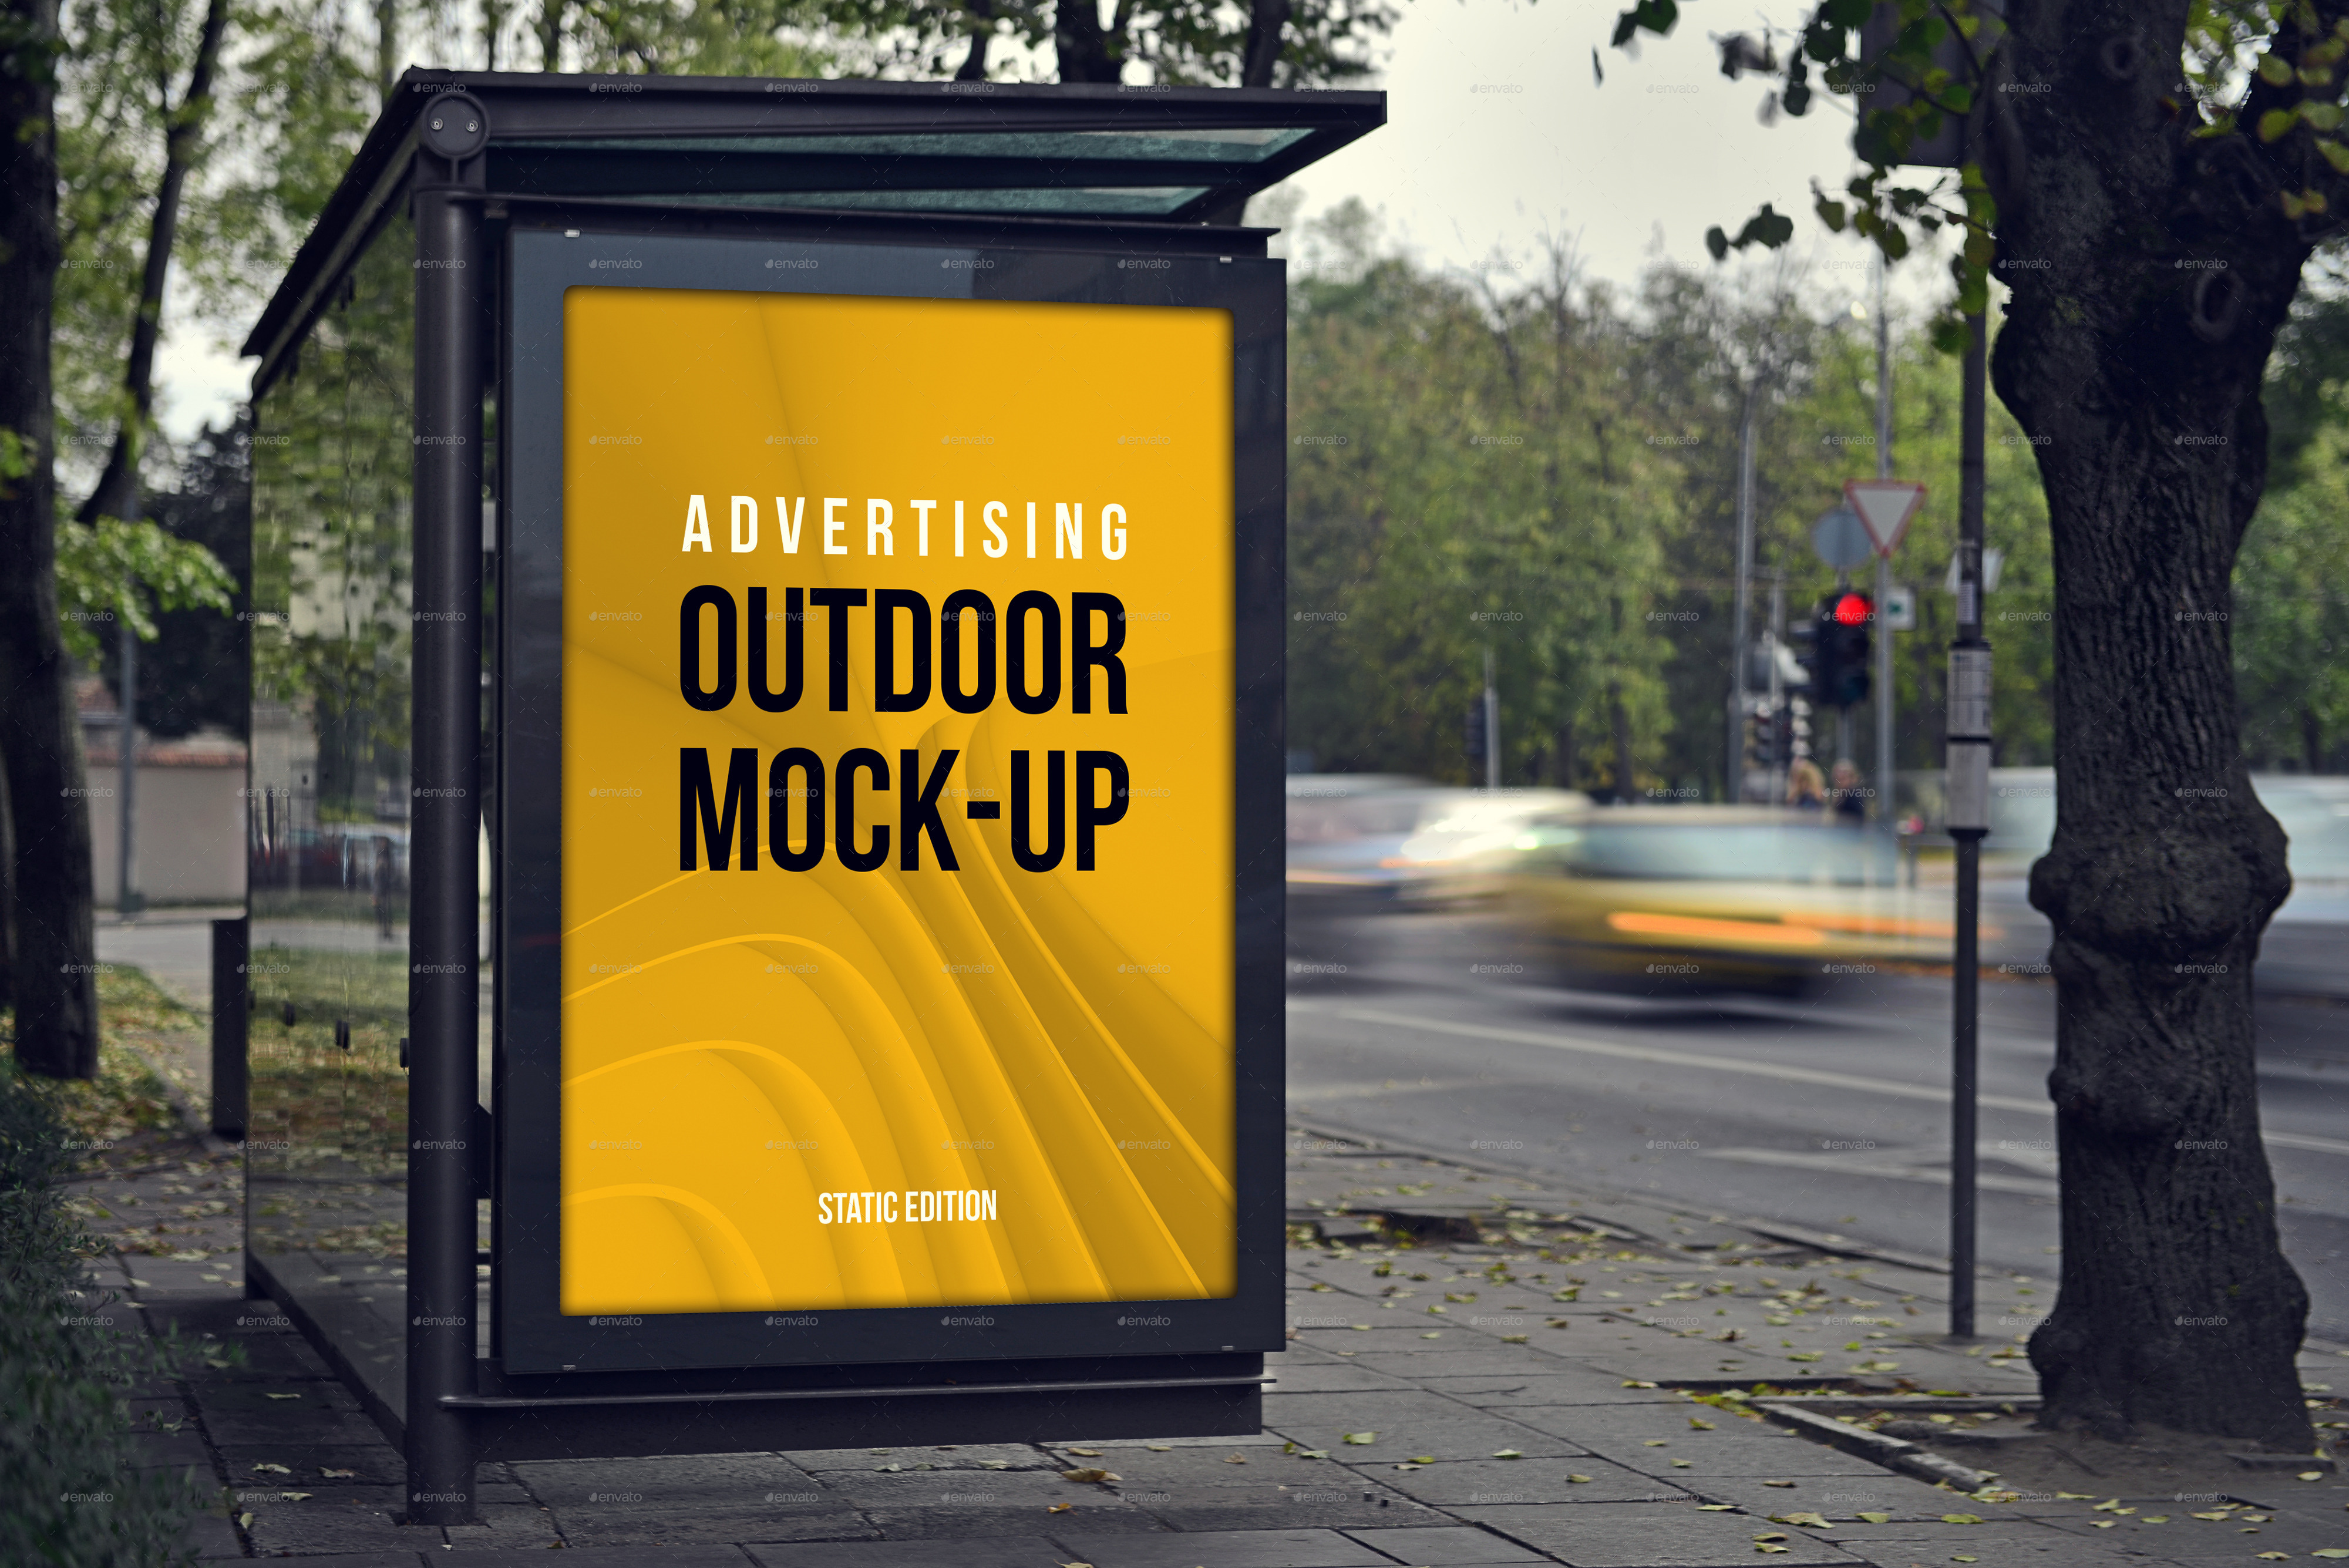 Download Animated Outdoor Advertising Mock-ups by Genetic96 | GraphicRiver